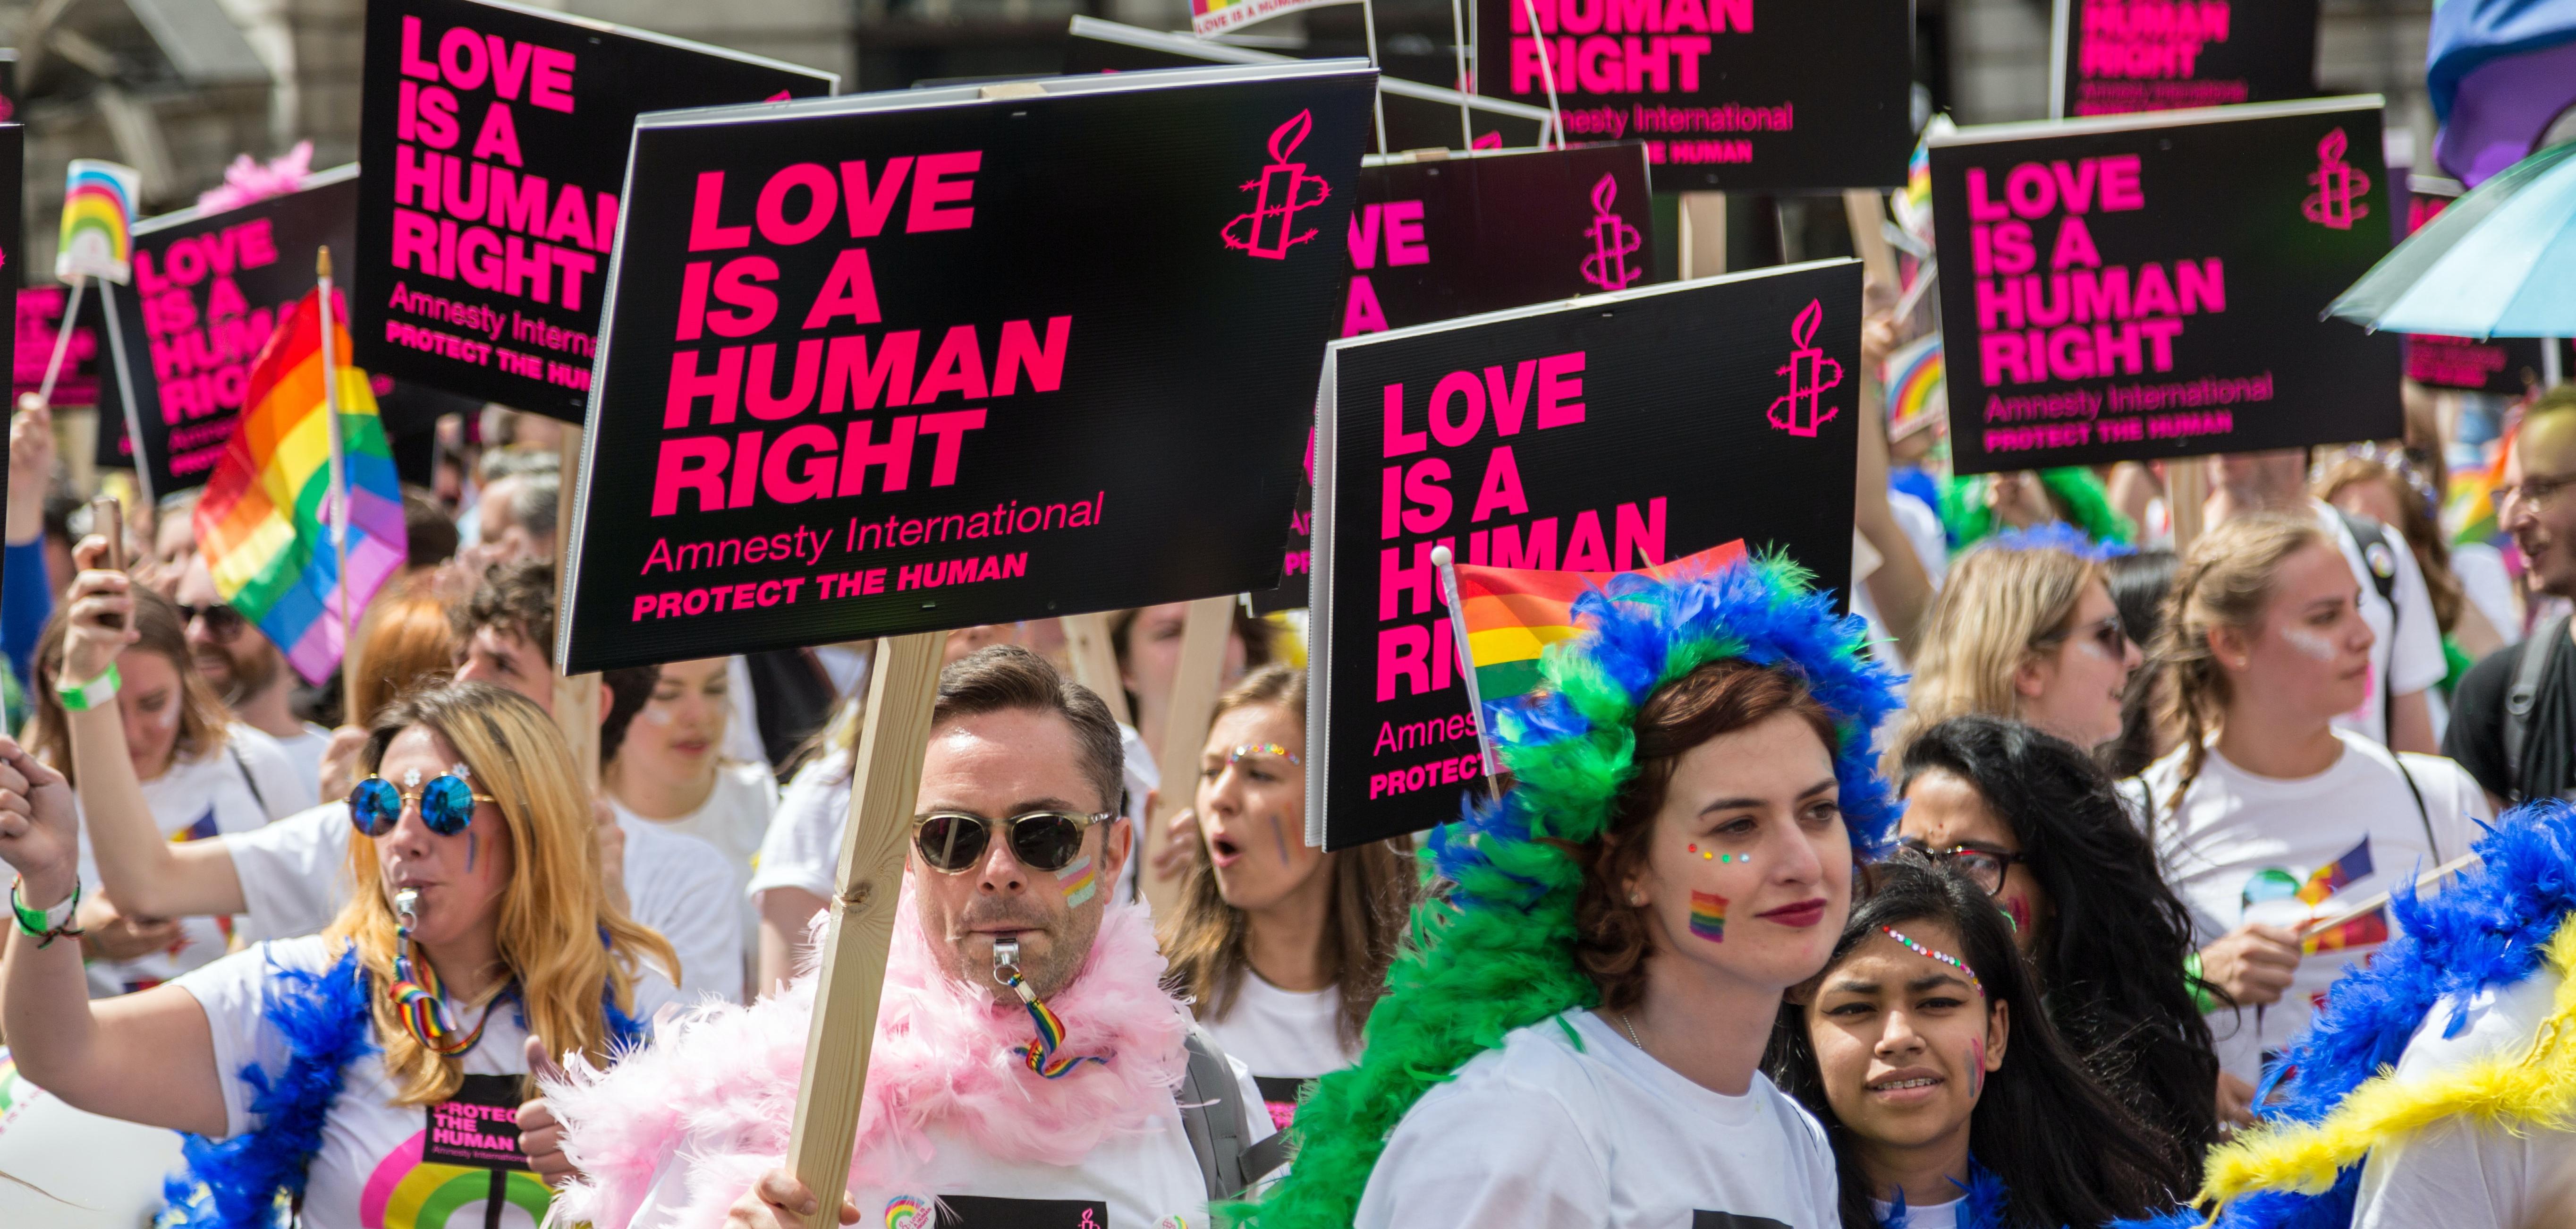 People in a protest wearing rainbow wigs, holding signs that say "love is a human right"